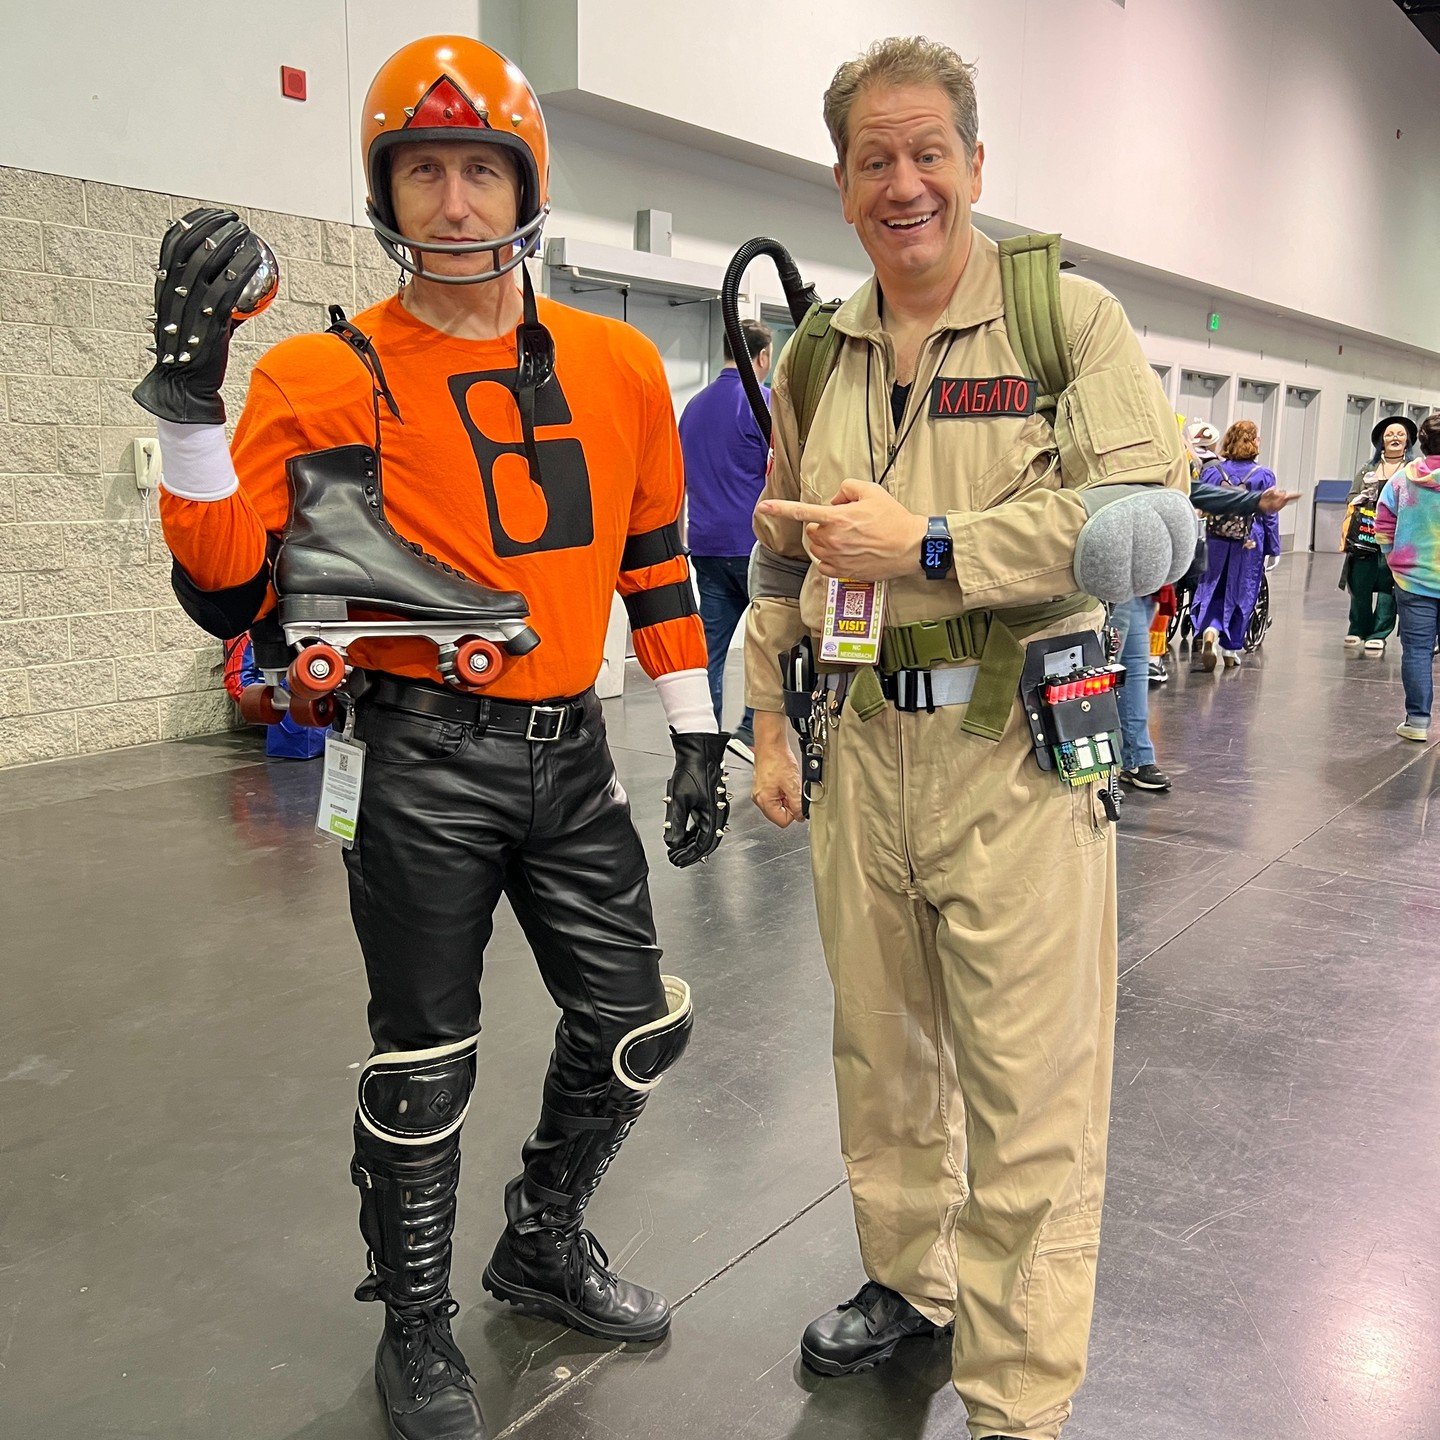 Ran into a cosplayer from the classic 1975 film Rollerball at @wondercon the previous weekend. Didn't get his name but its always great to spot classic sci-fi cosplay.

#rollerball #rollerballcosplay #wondercon2024 #wonderconcosplay #wondercon2024cos